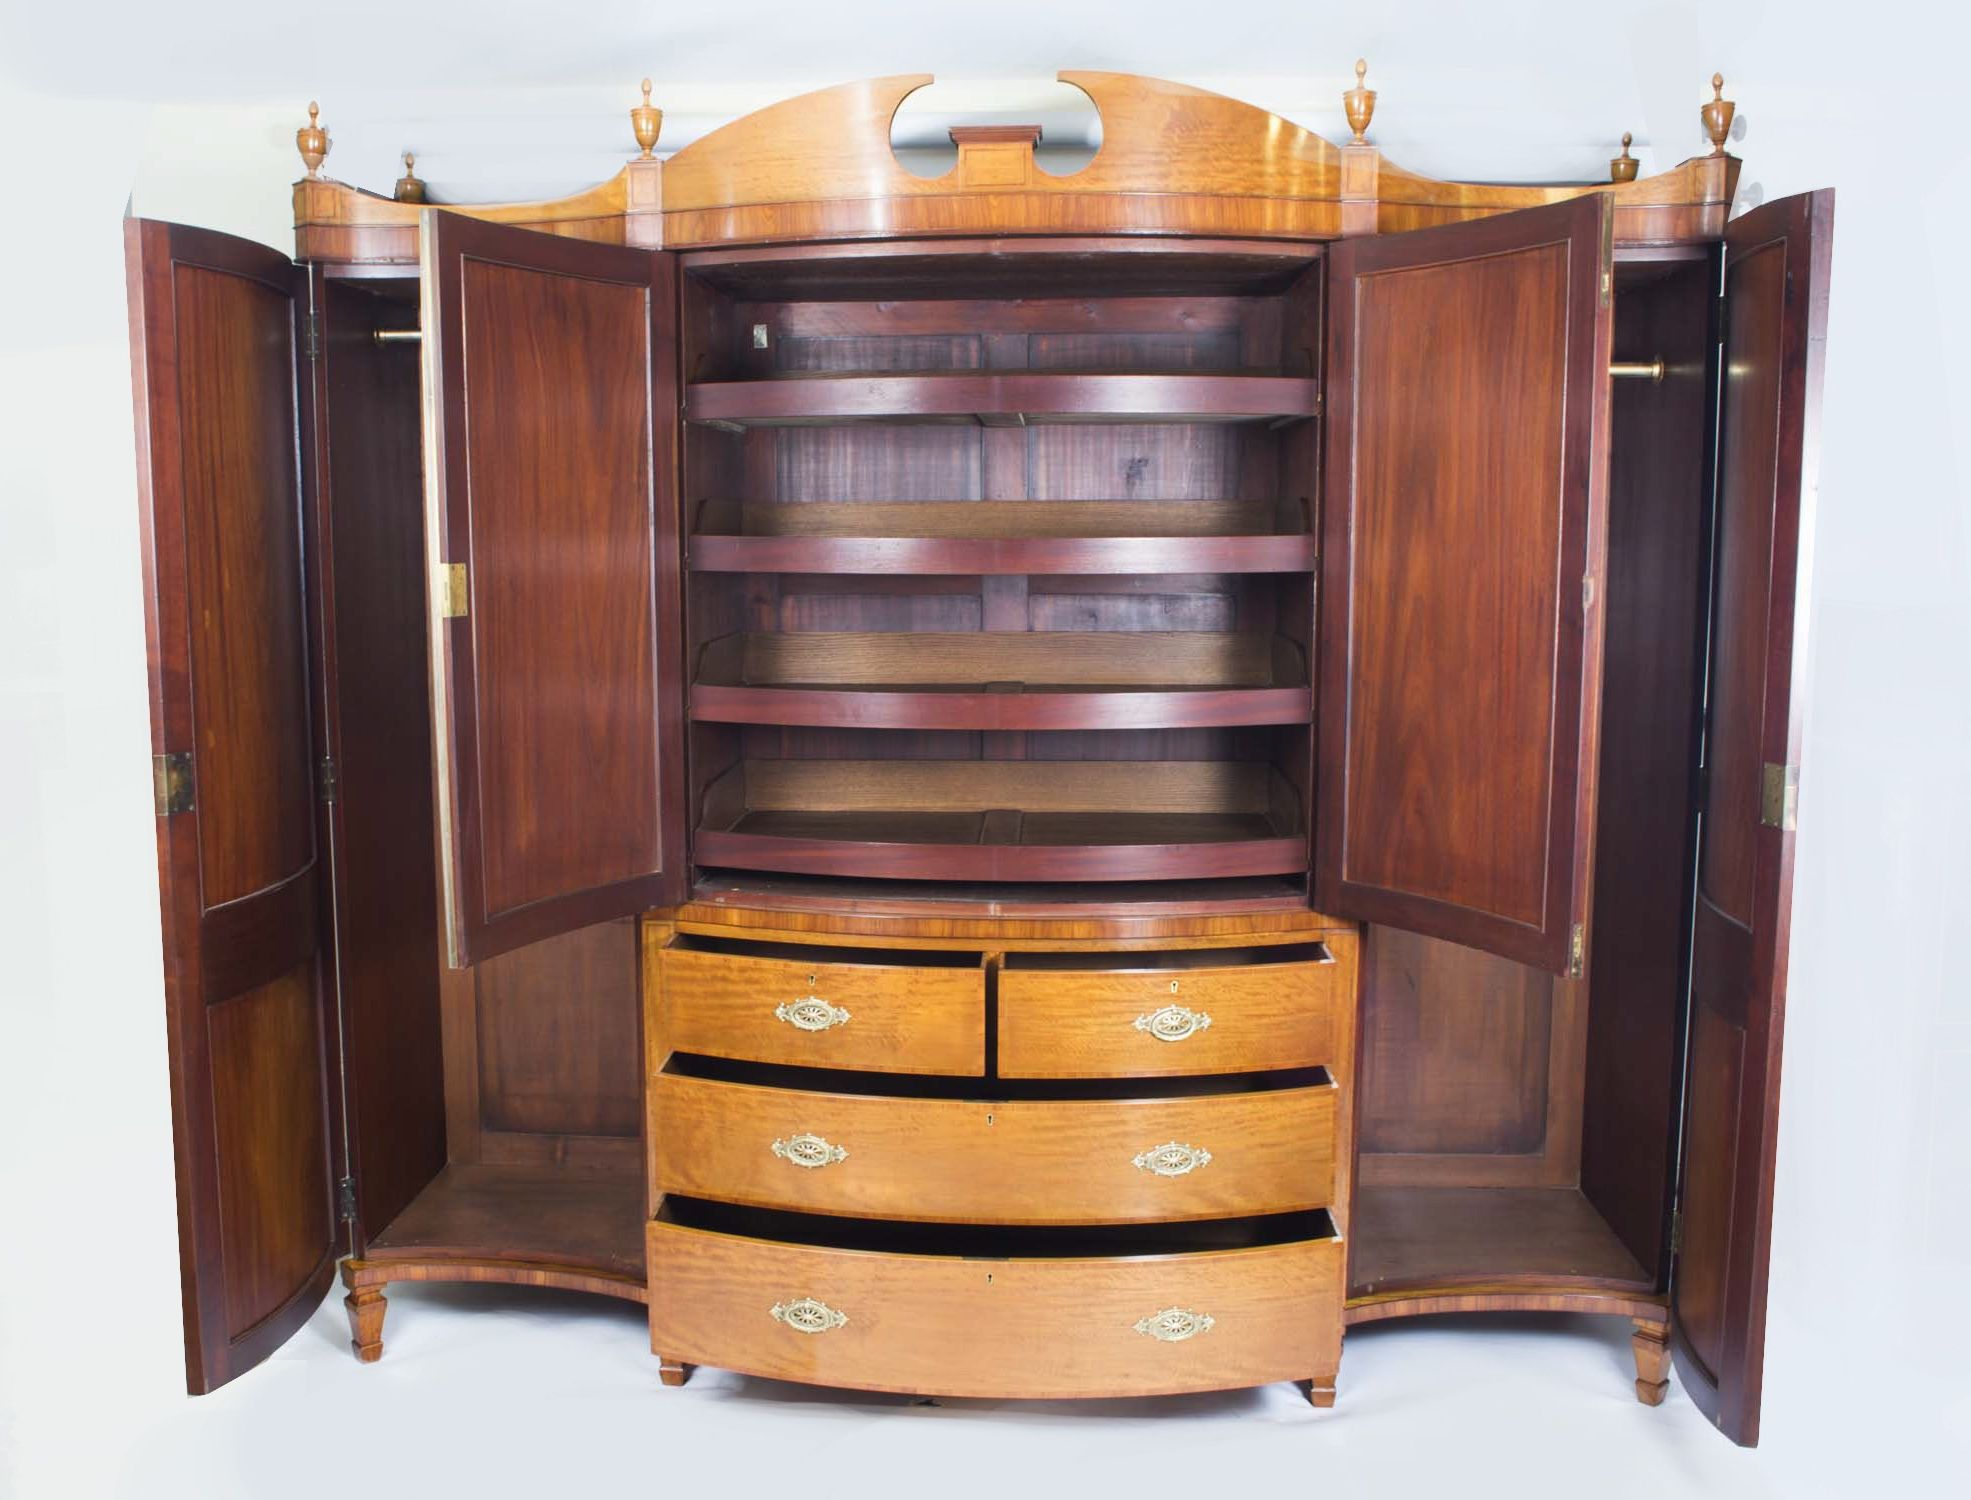 These Antique Wardrobes Don't Hang Around – Regent Antiques With Regard To Antique Wardrobes (View 13 of 20)